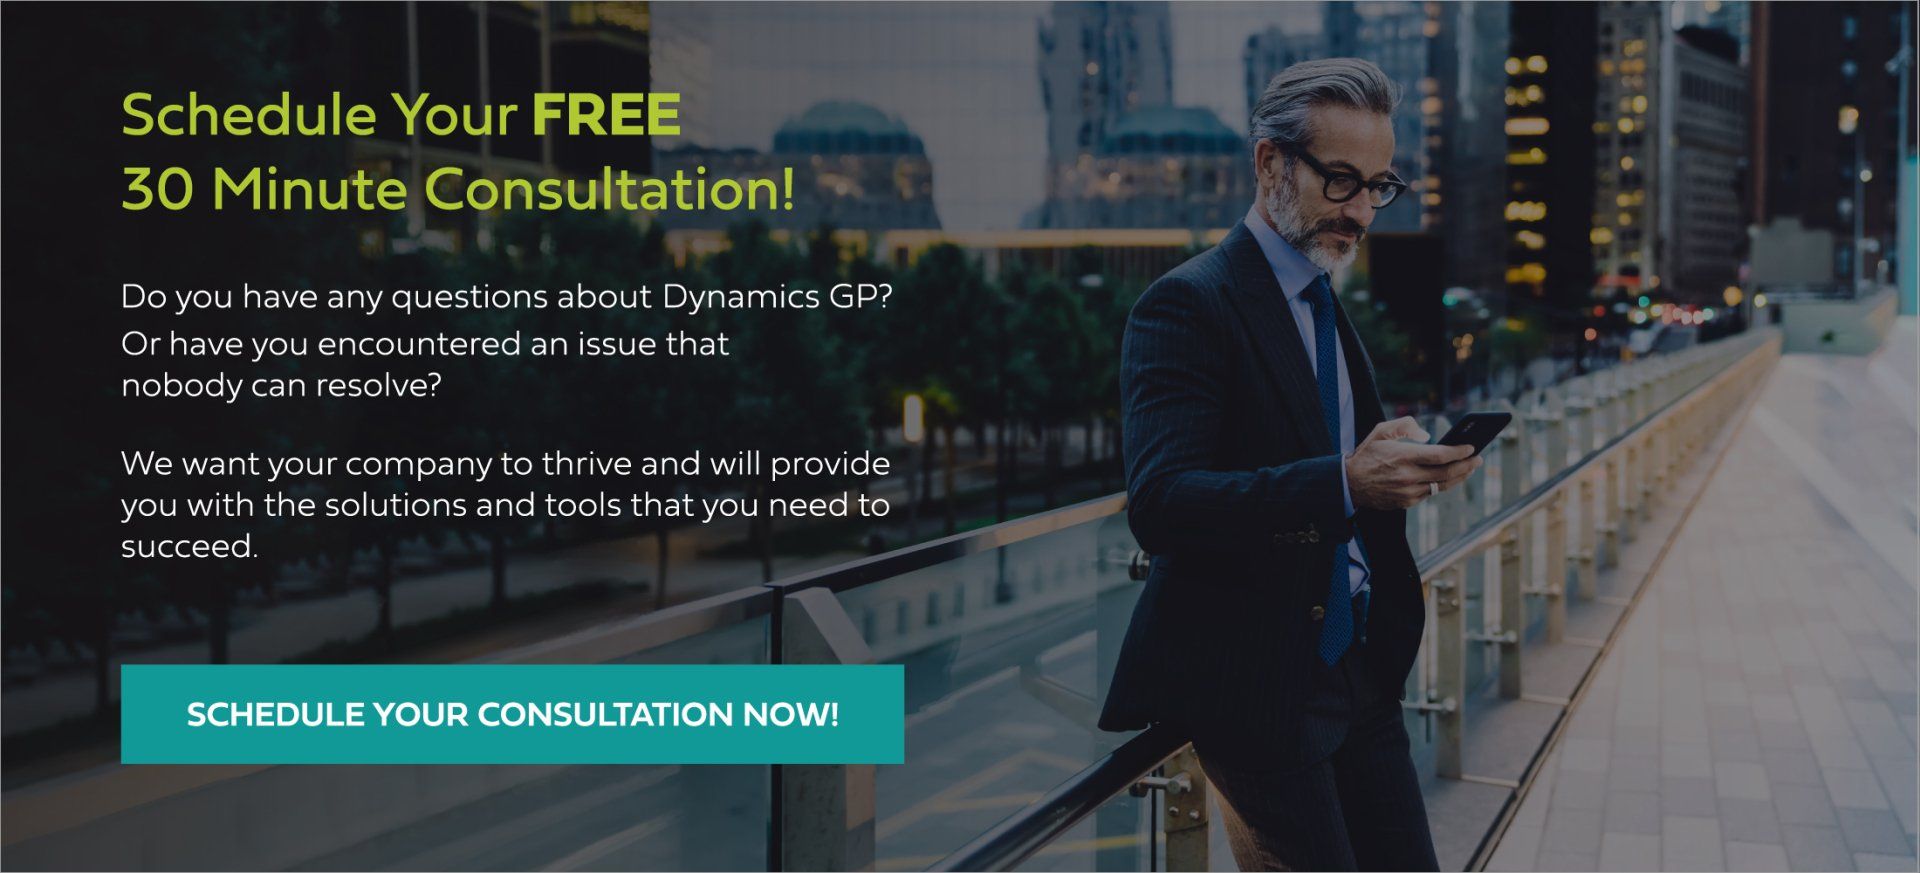 Dynamics GP Consulting